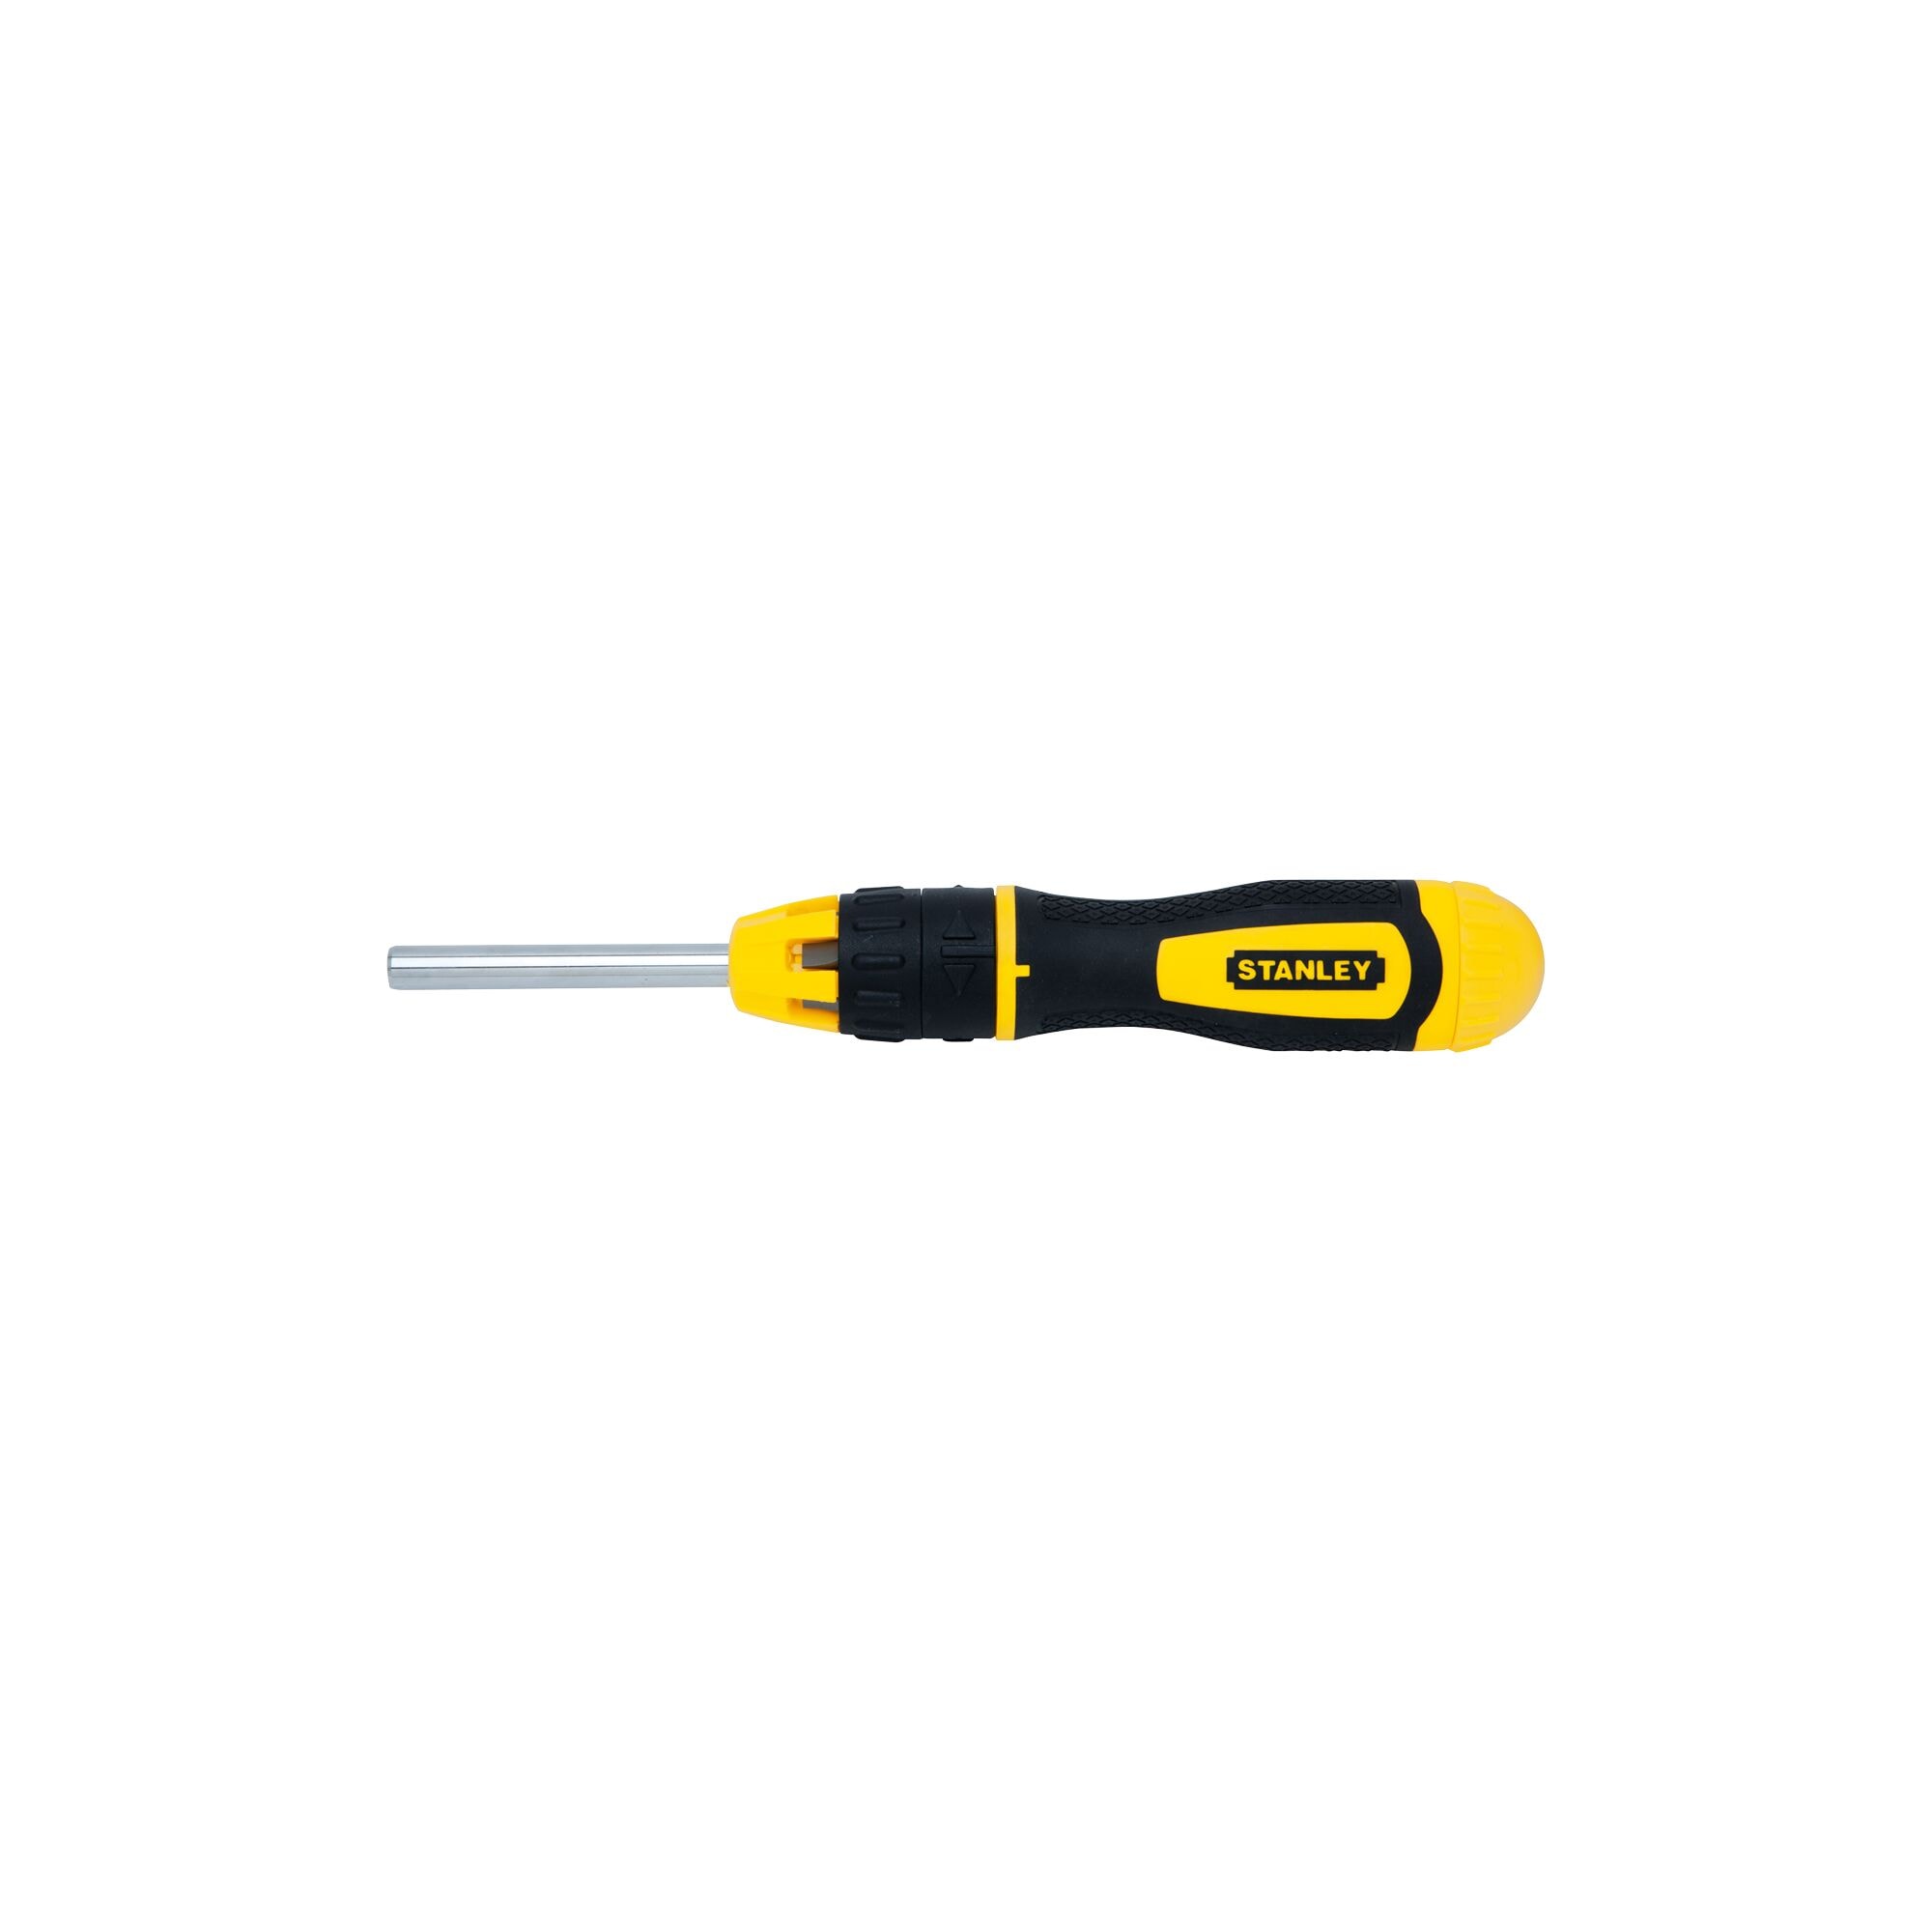 Stanley 68-010 Multibit Ratcheting Screwdriver with 10 Assorted Bits